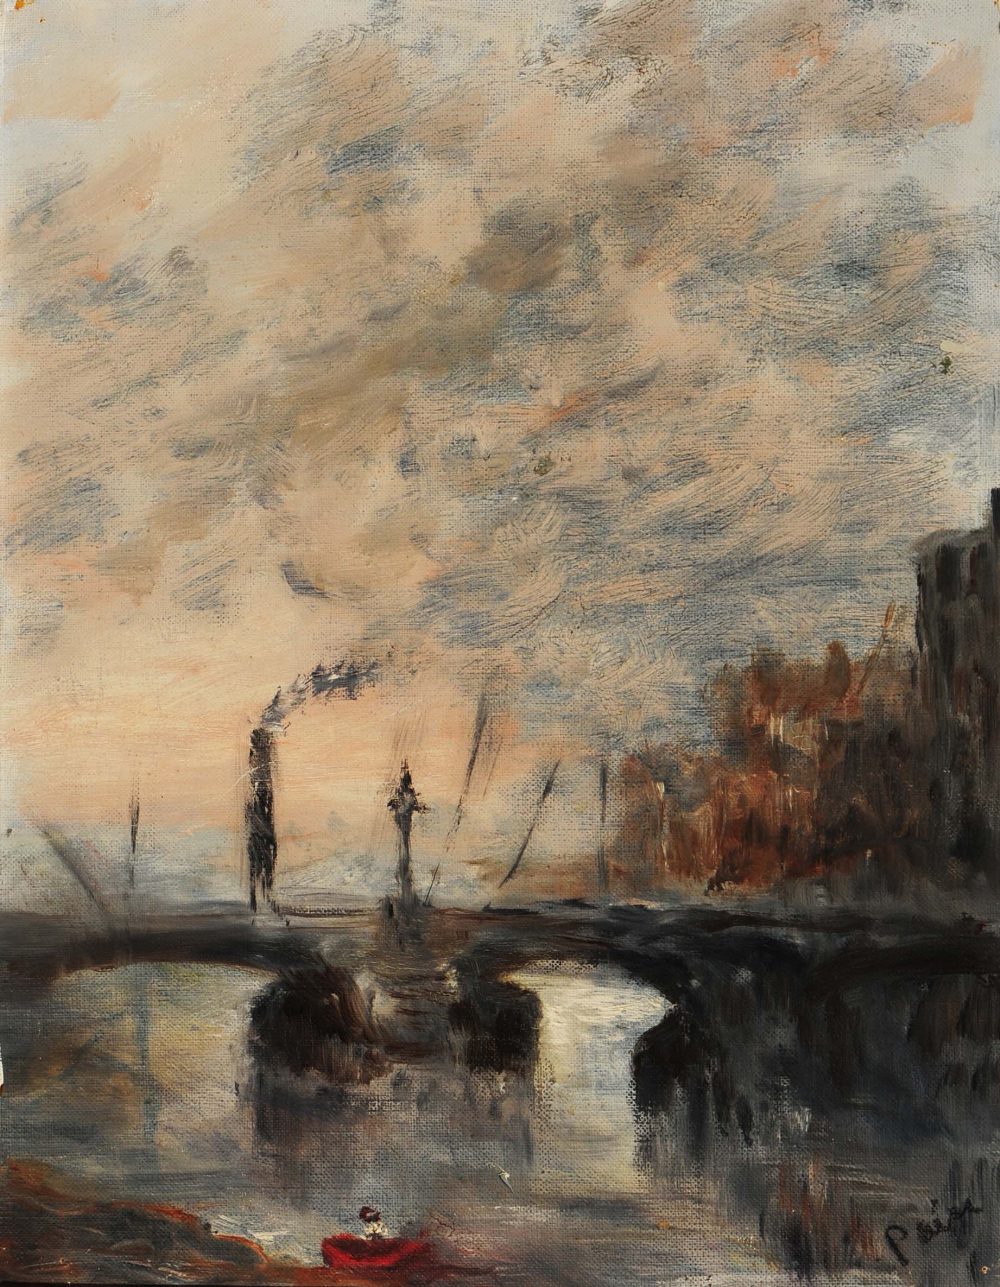 IRENE PAIN (20TH CENTURY) 'Vauxhall at Low Tide 1960', signed, oil on canvas, 49.5 x 39.5cm